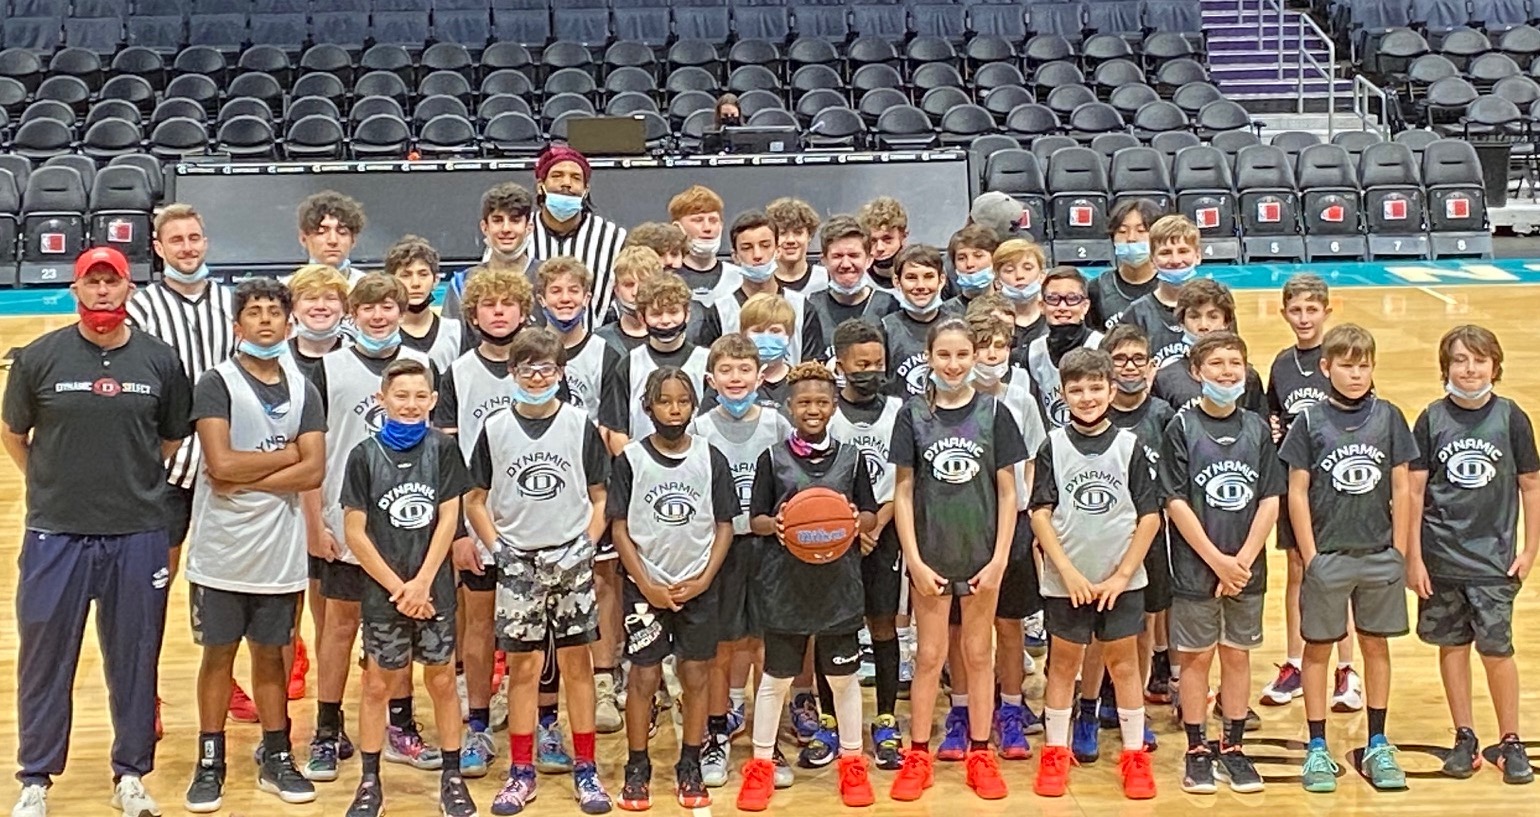 2022 Hornets event group pic